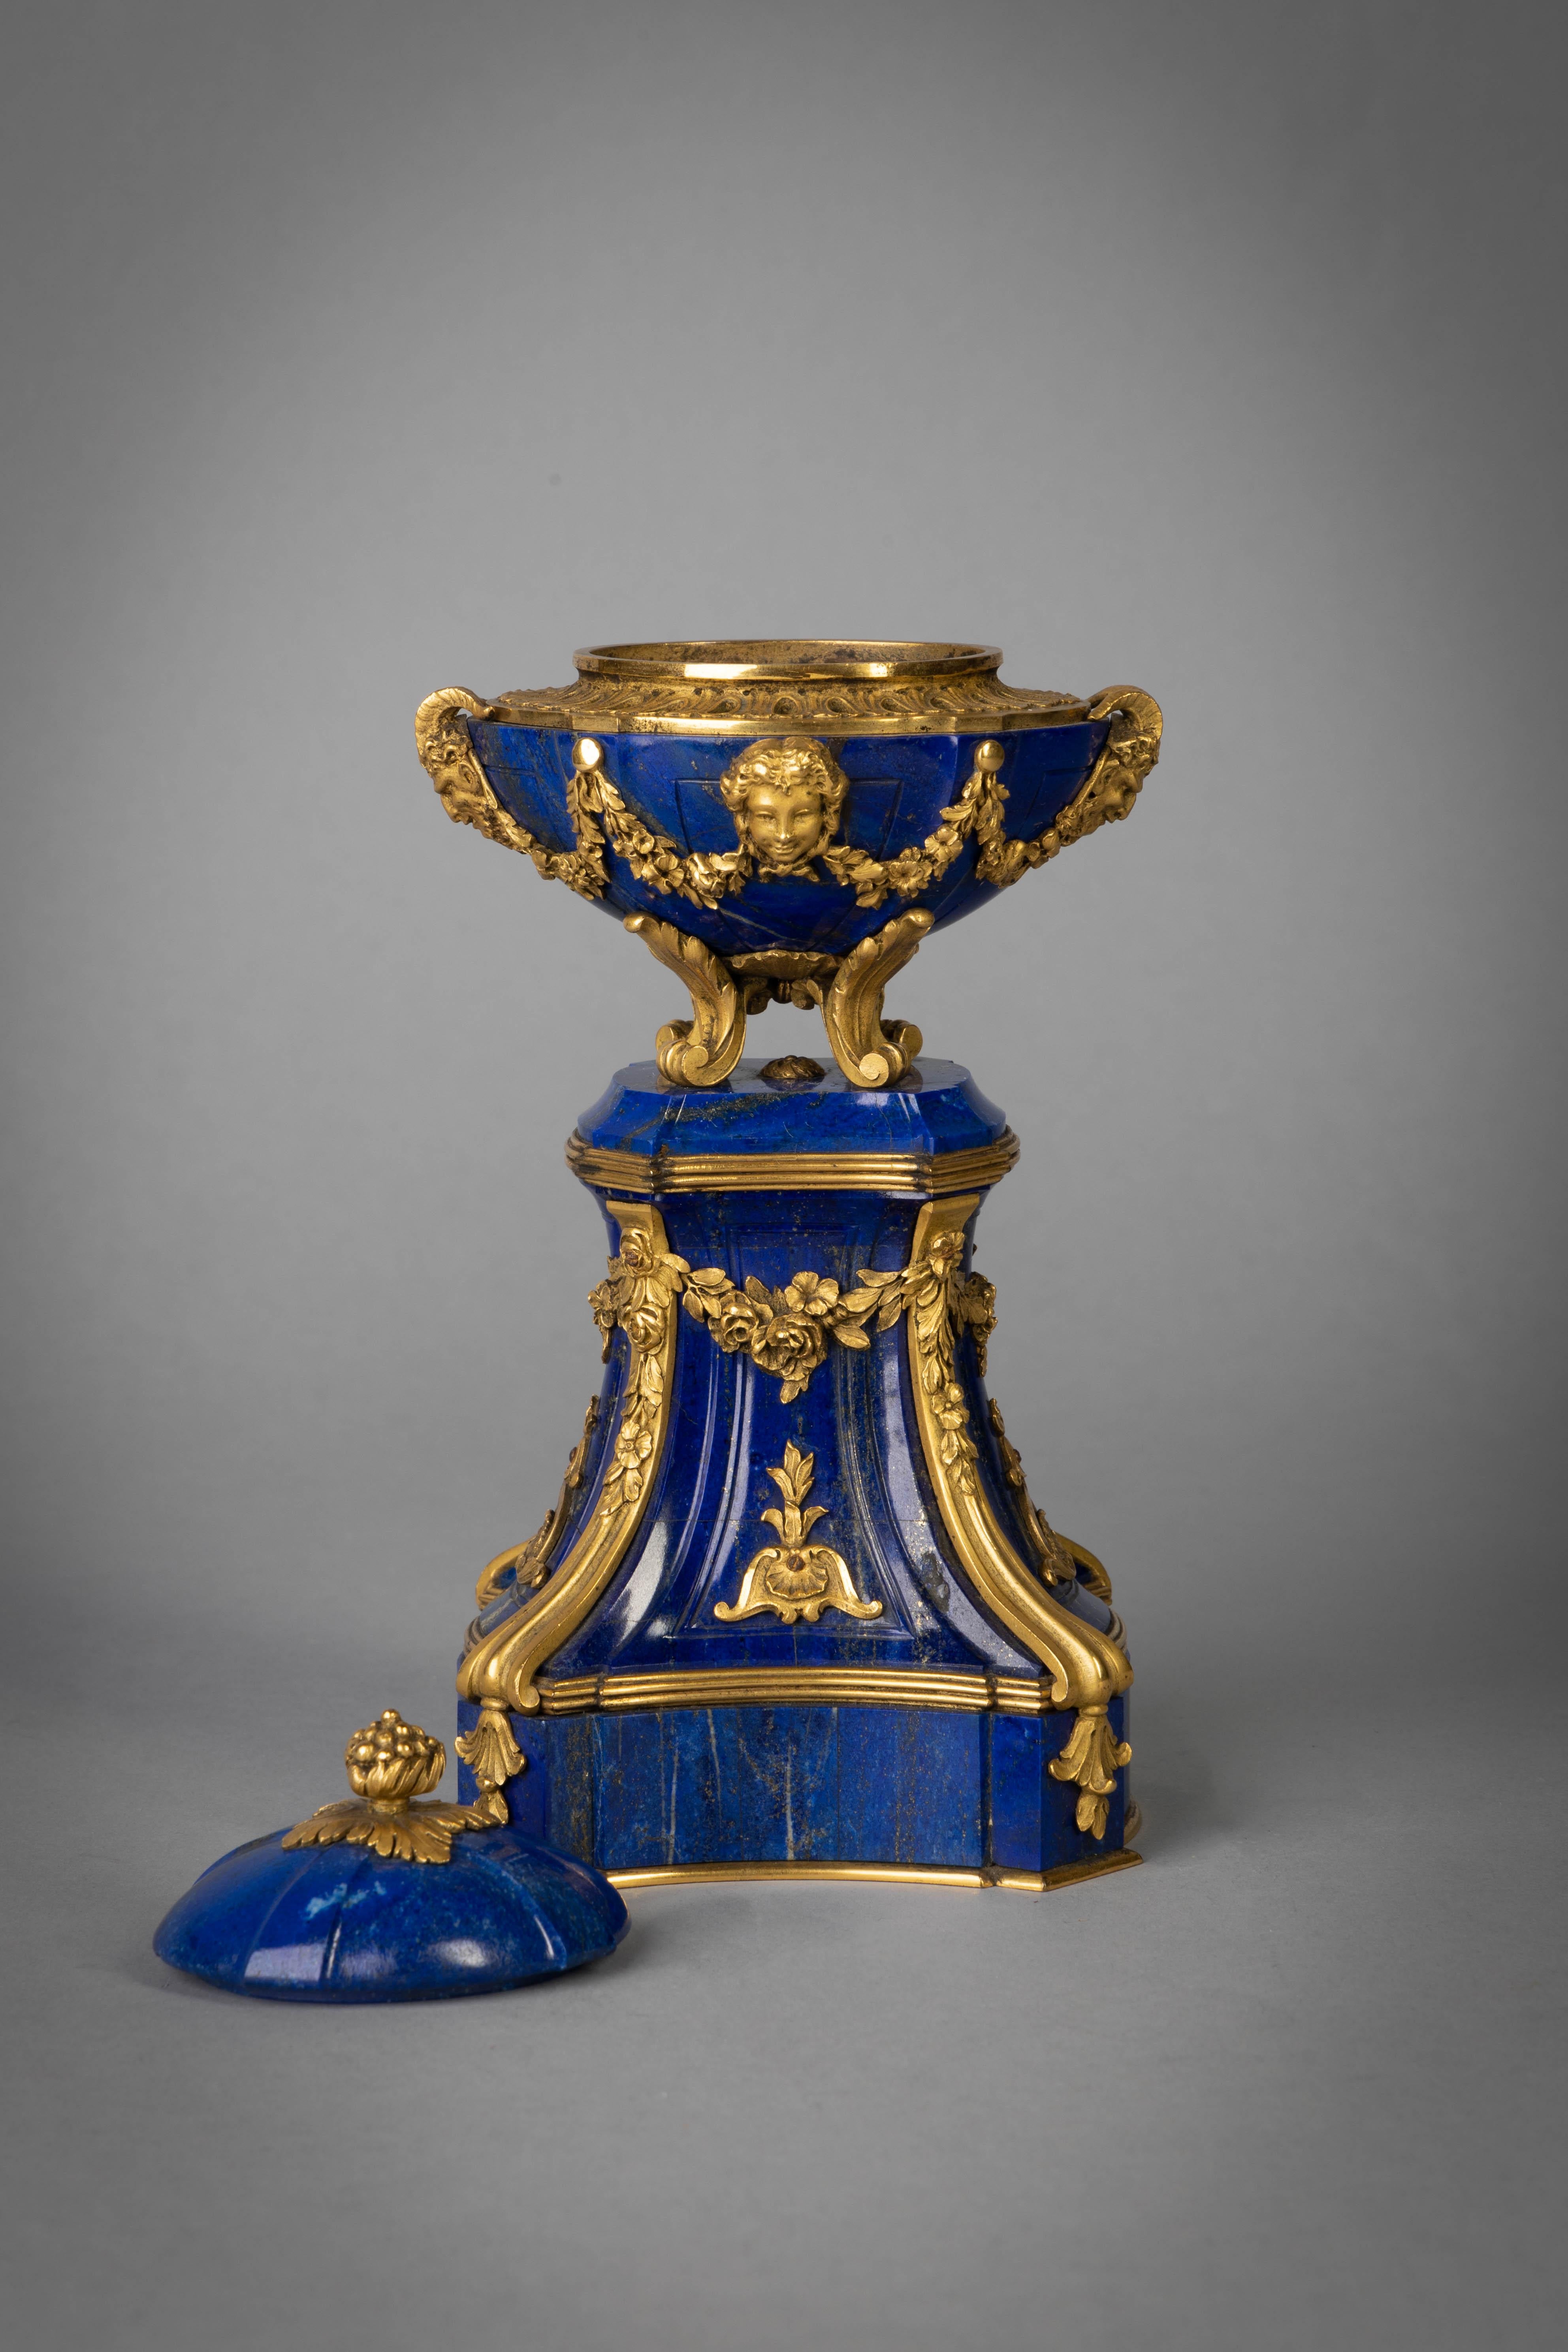 With rich lapis and jewel-like bronze mounts, satyr mask handles and garlands of flowers centered on two bacchantes. The pedestal similarly mounted with garlands and shells.